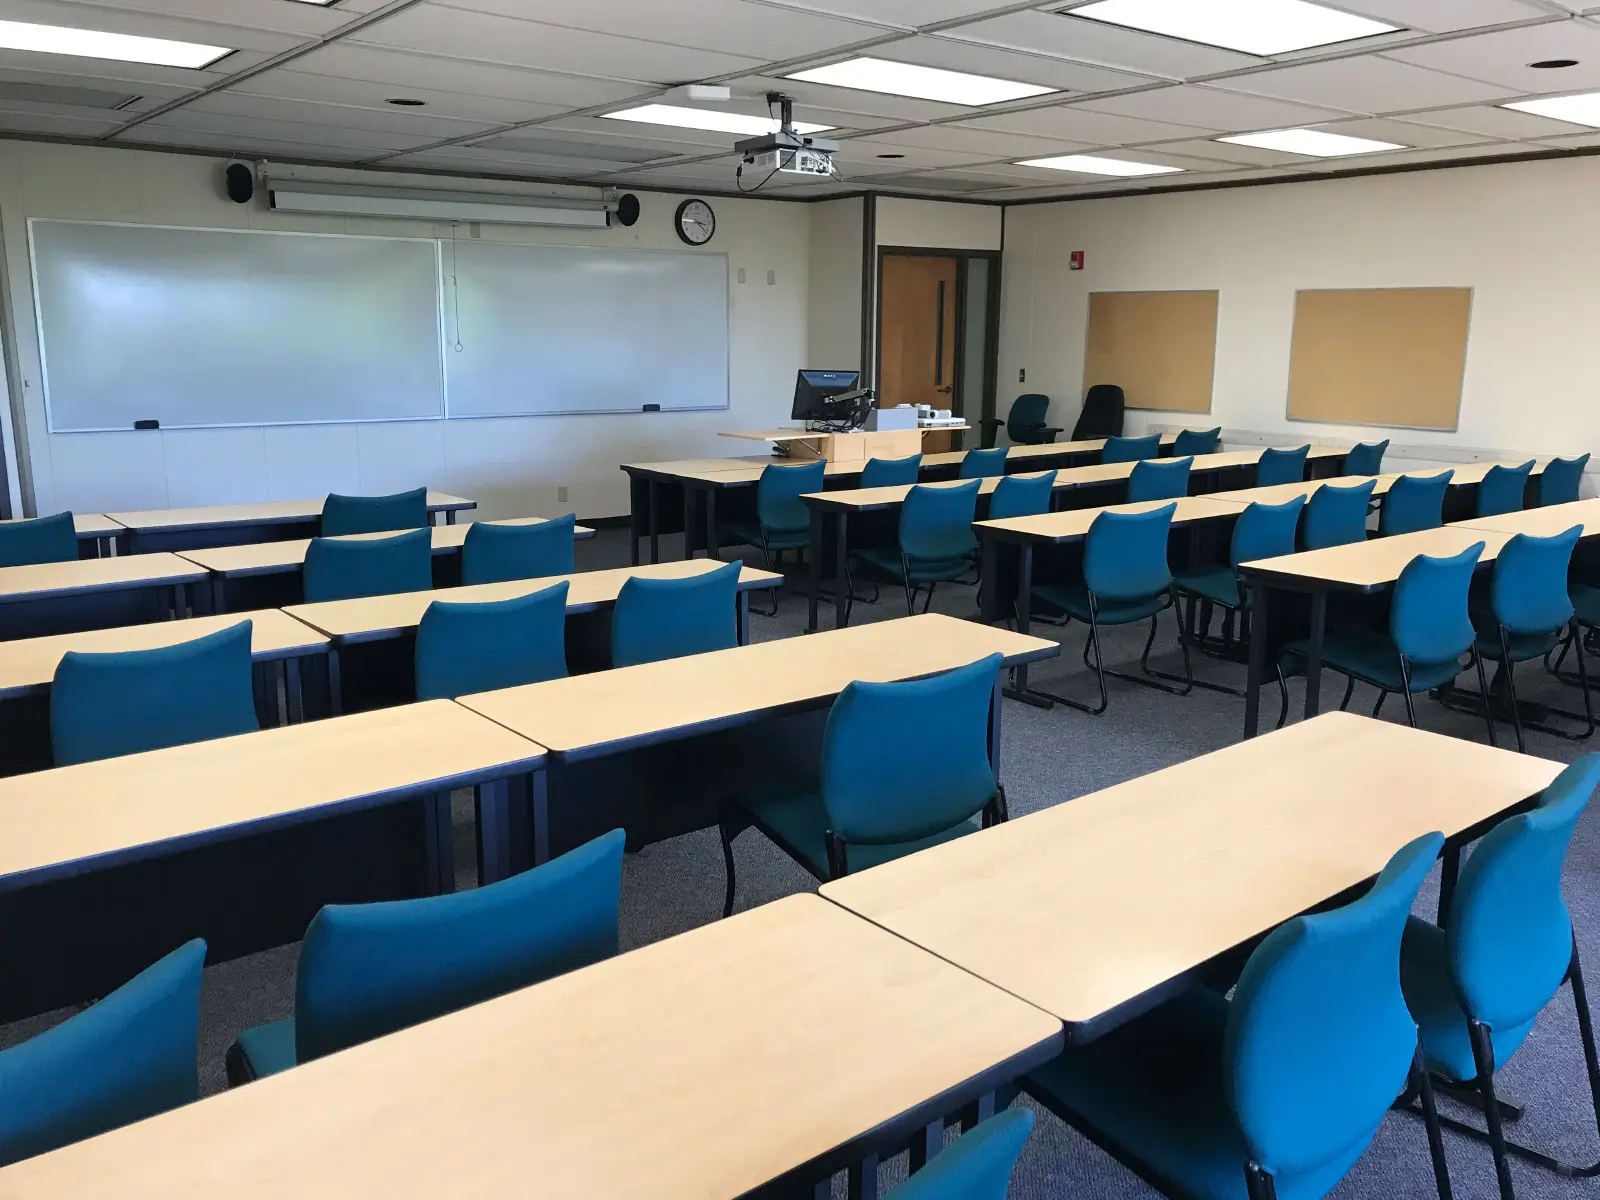 Rows of tables with blue chairs in a classroom with a large whiteboard and projector